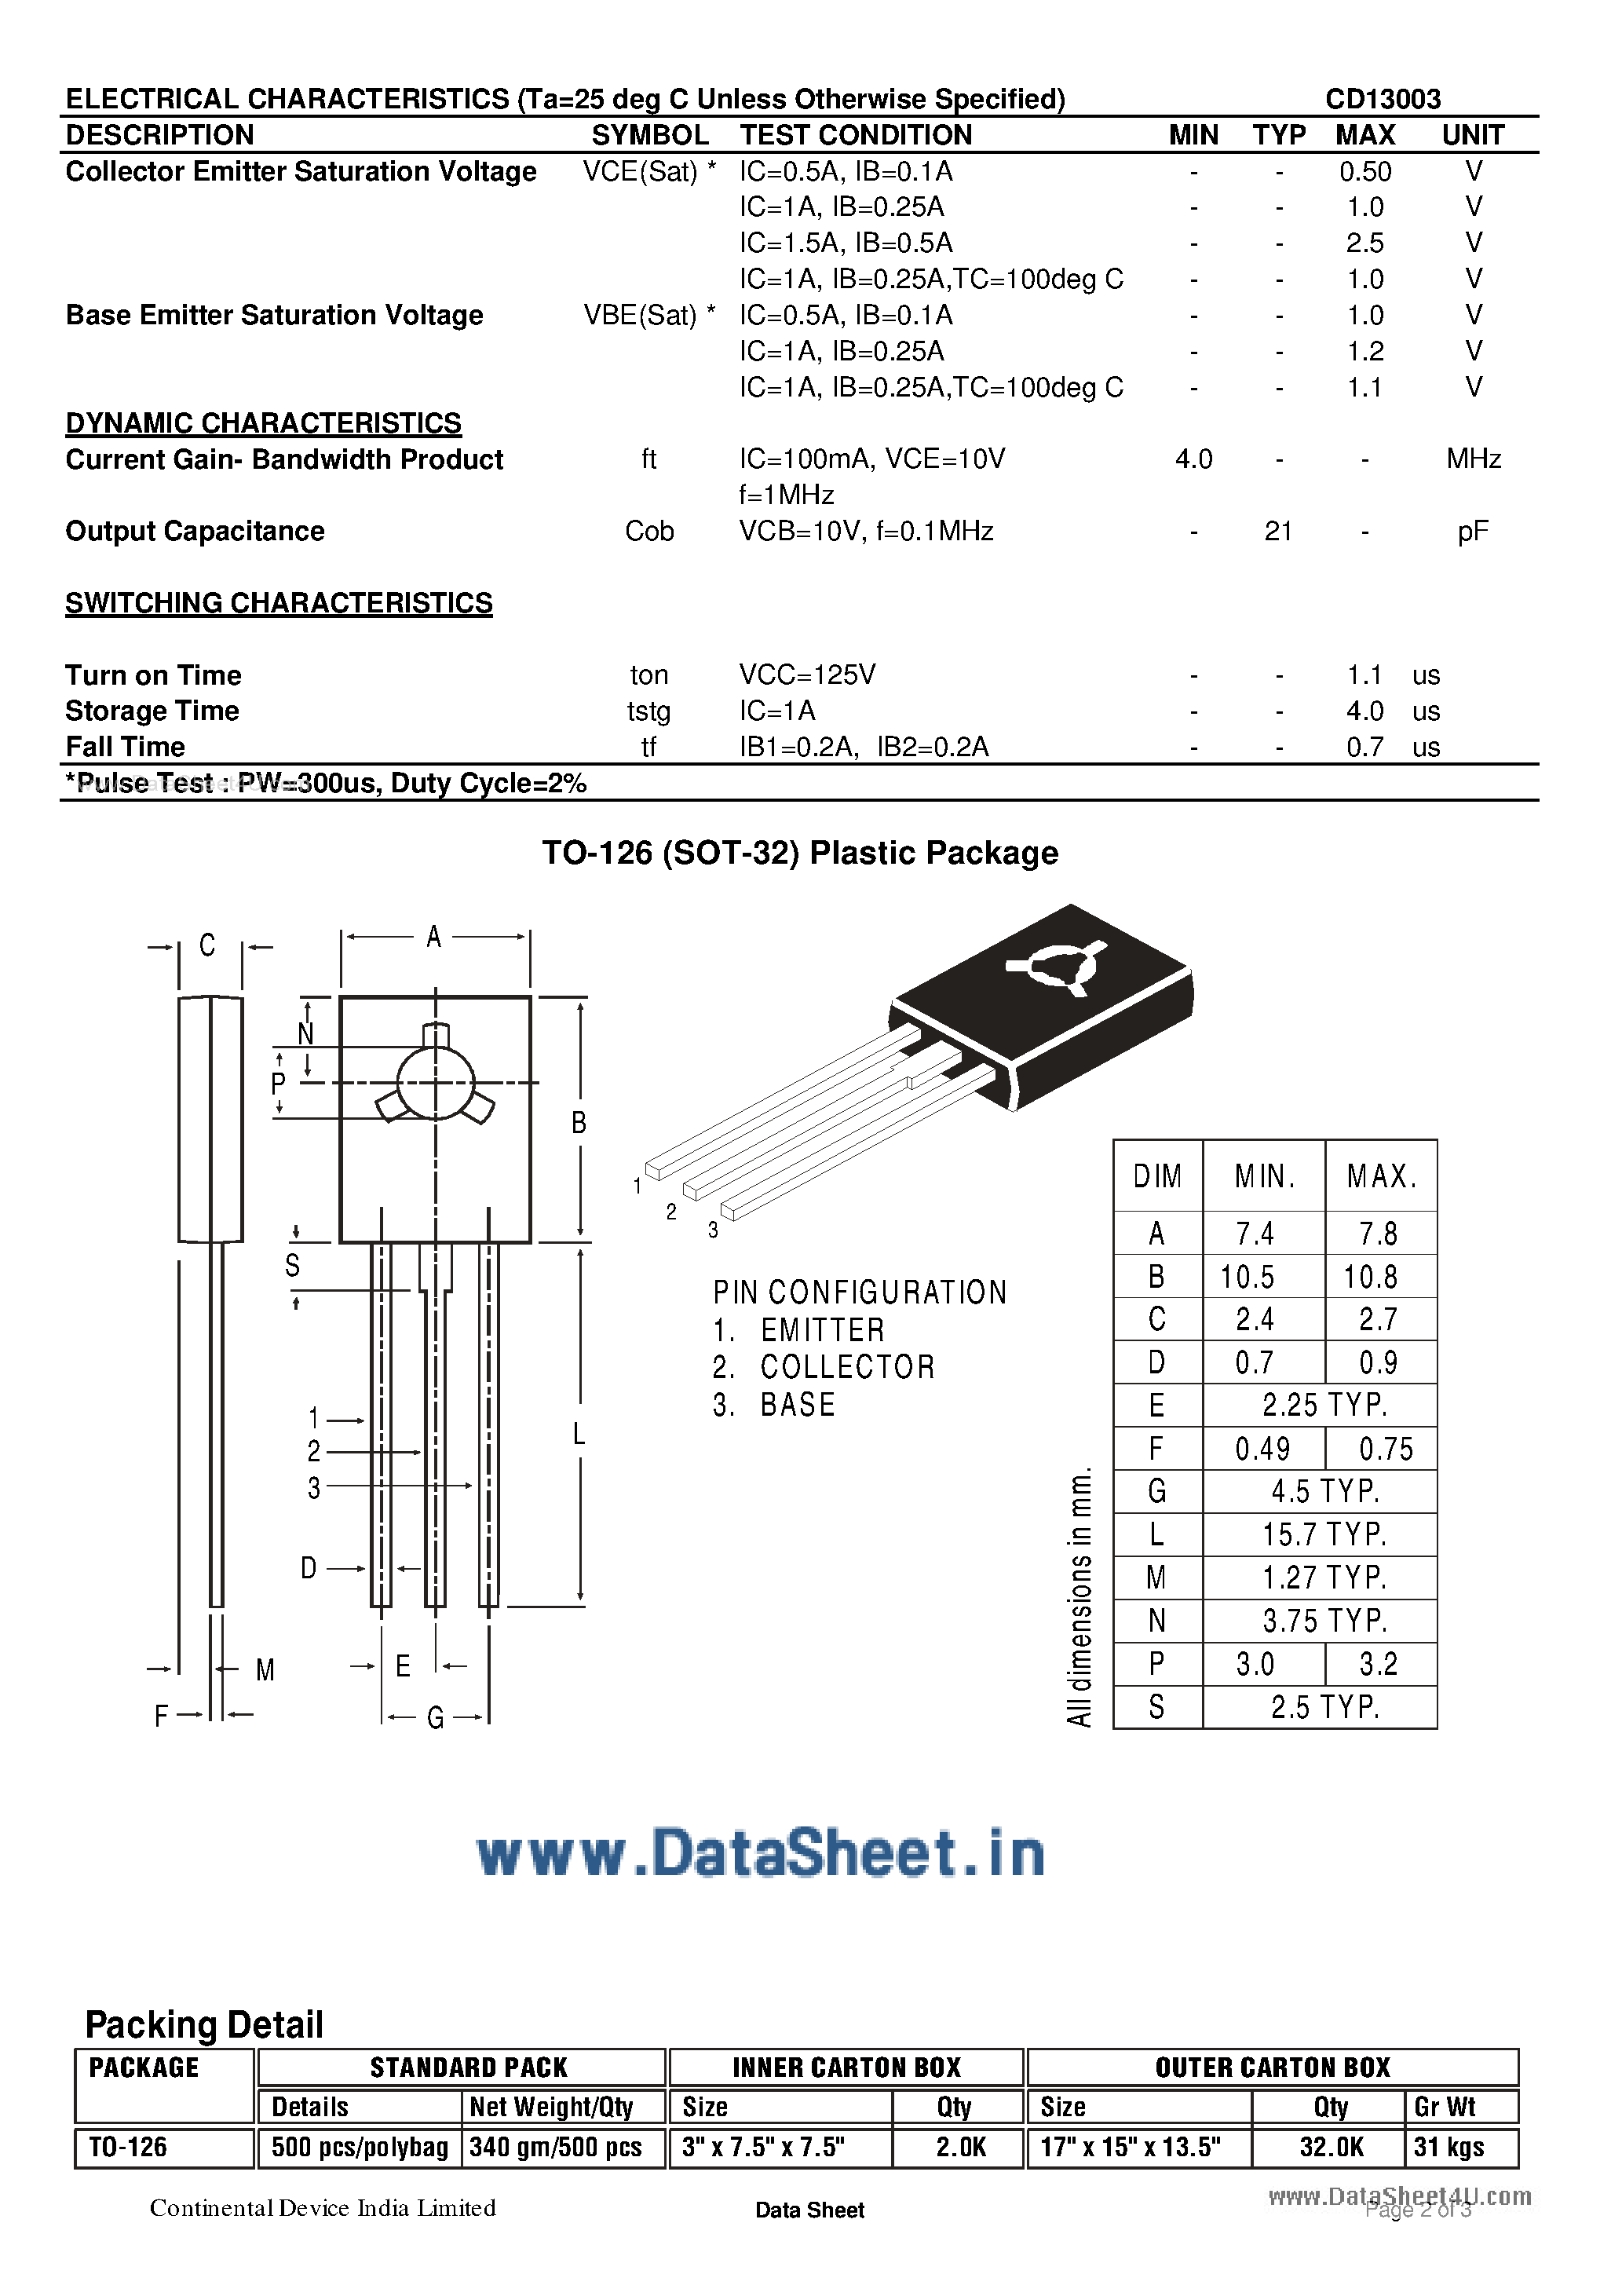 Datasheet D13003 - Search ---> CD13003 page 2